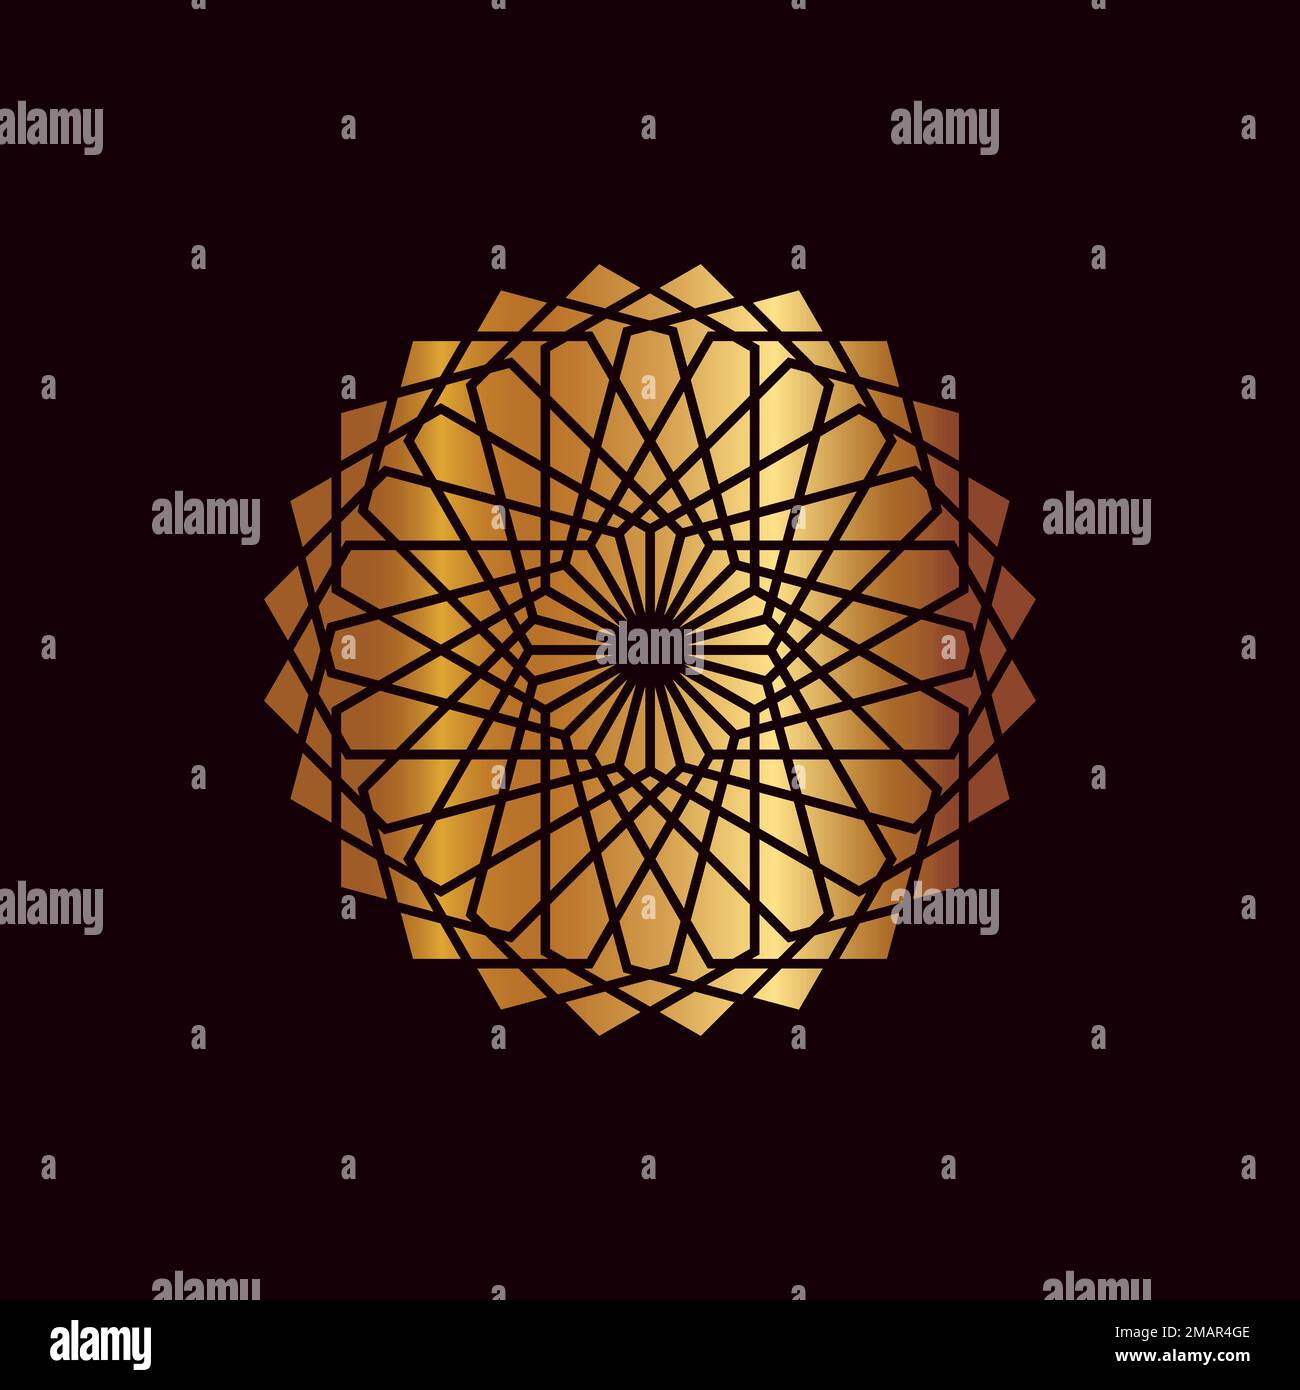 mandala logo element template, suitable for spa, yoga, meditation and spirituality logos with vector eps format. Stock Vector